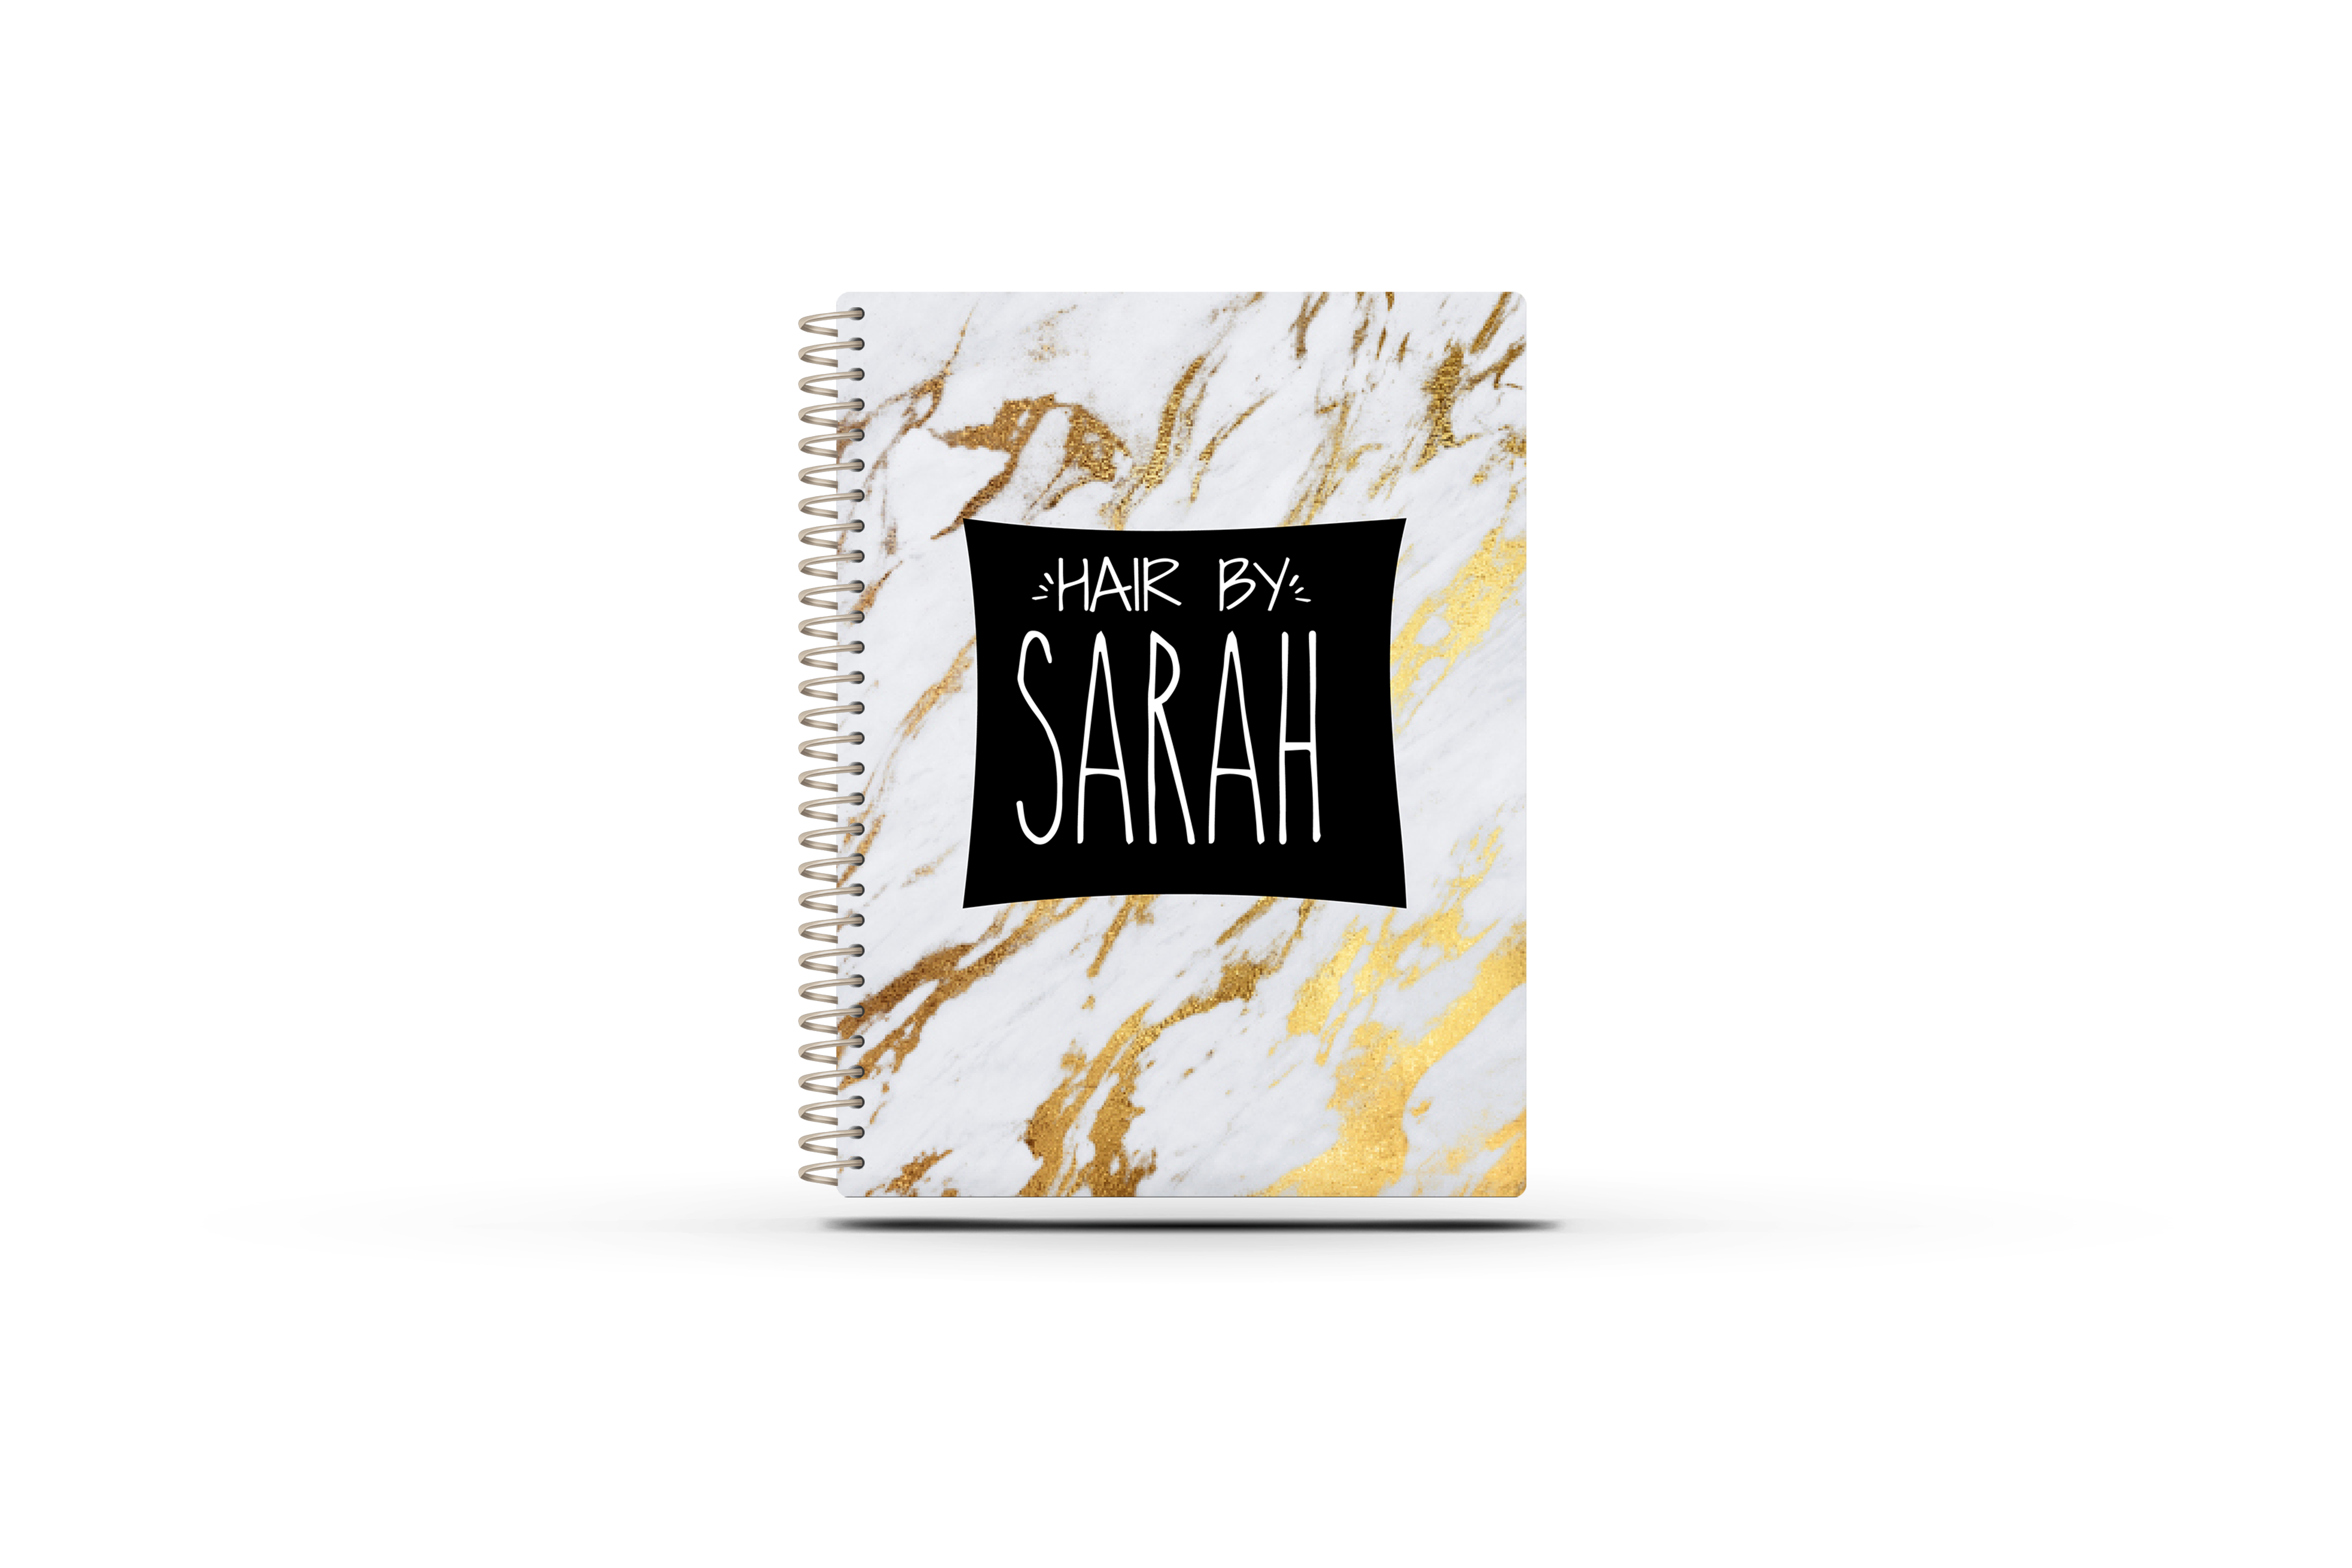 Small Biz Sales Planner - GOLD MARBLE